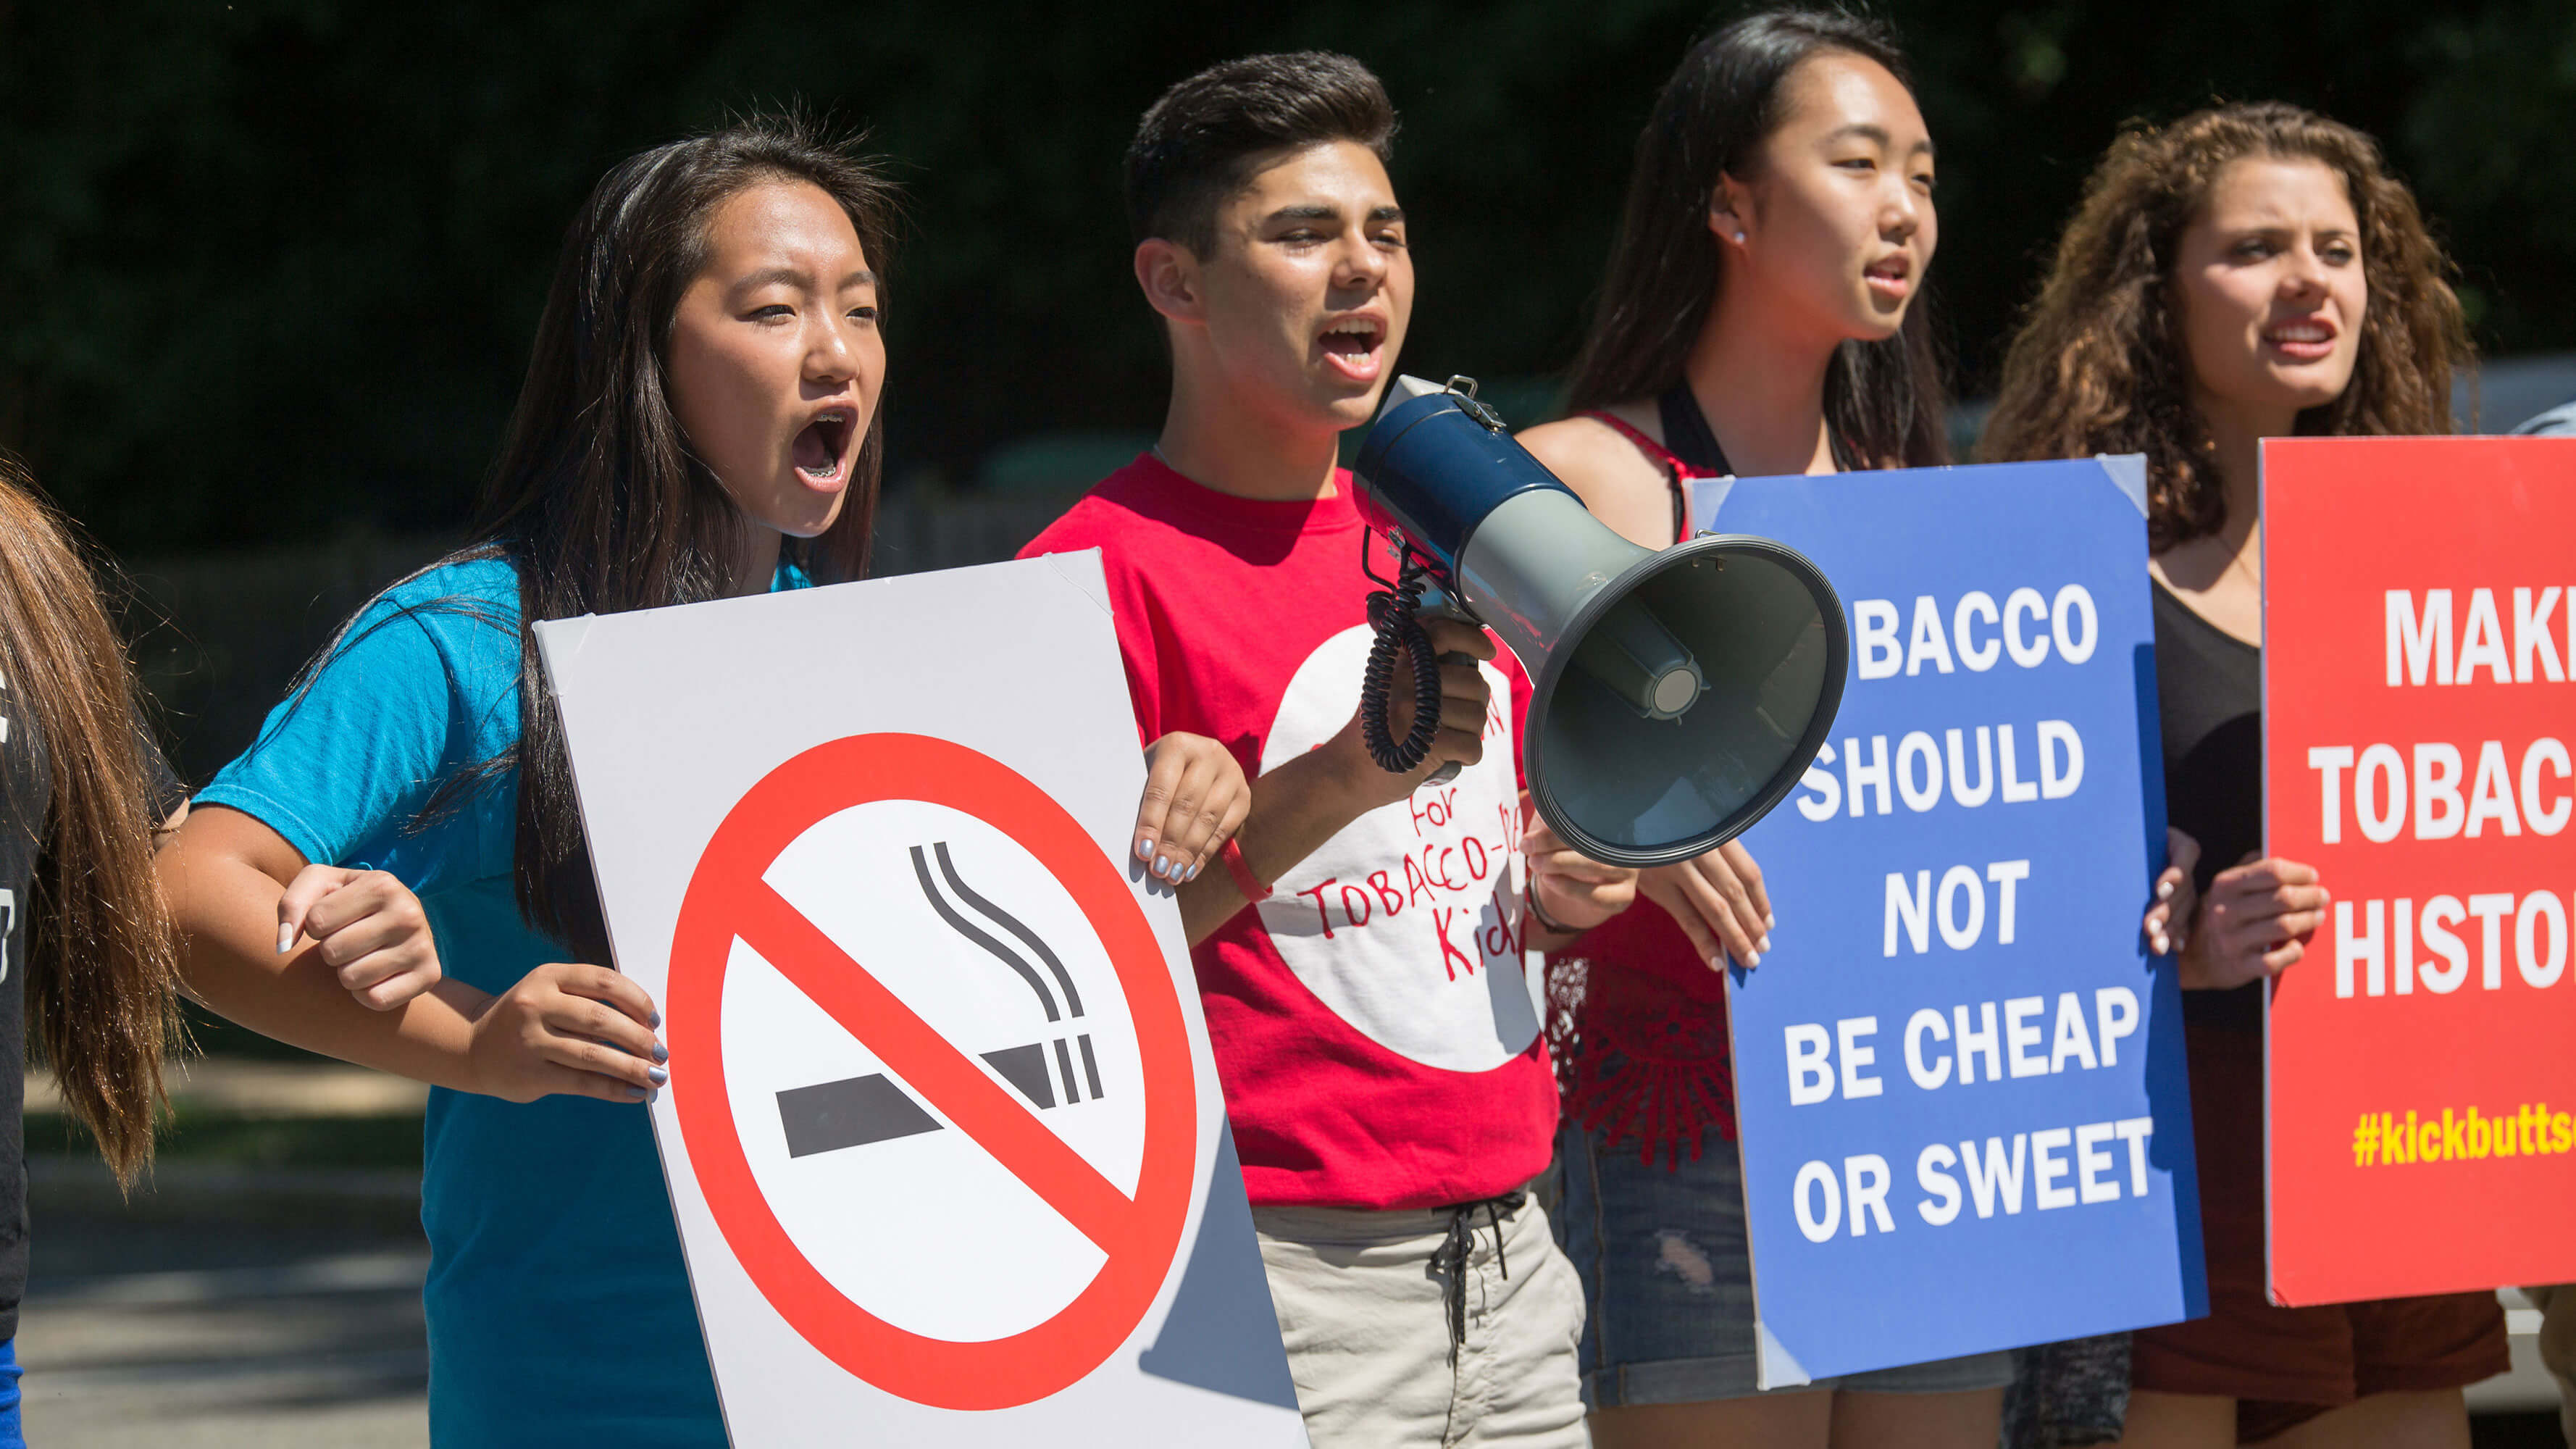 Young people standing together holding anti-tobacco signs in protest.